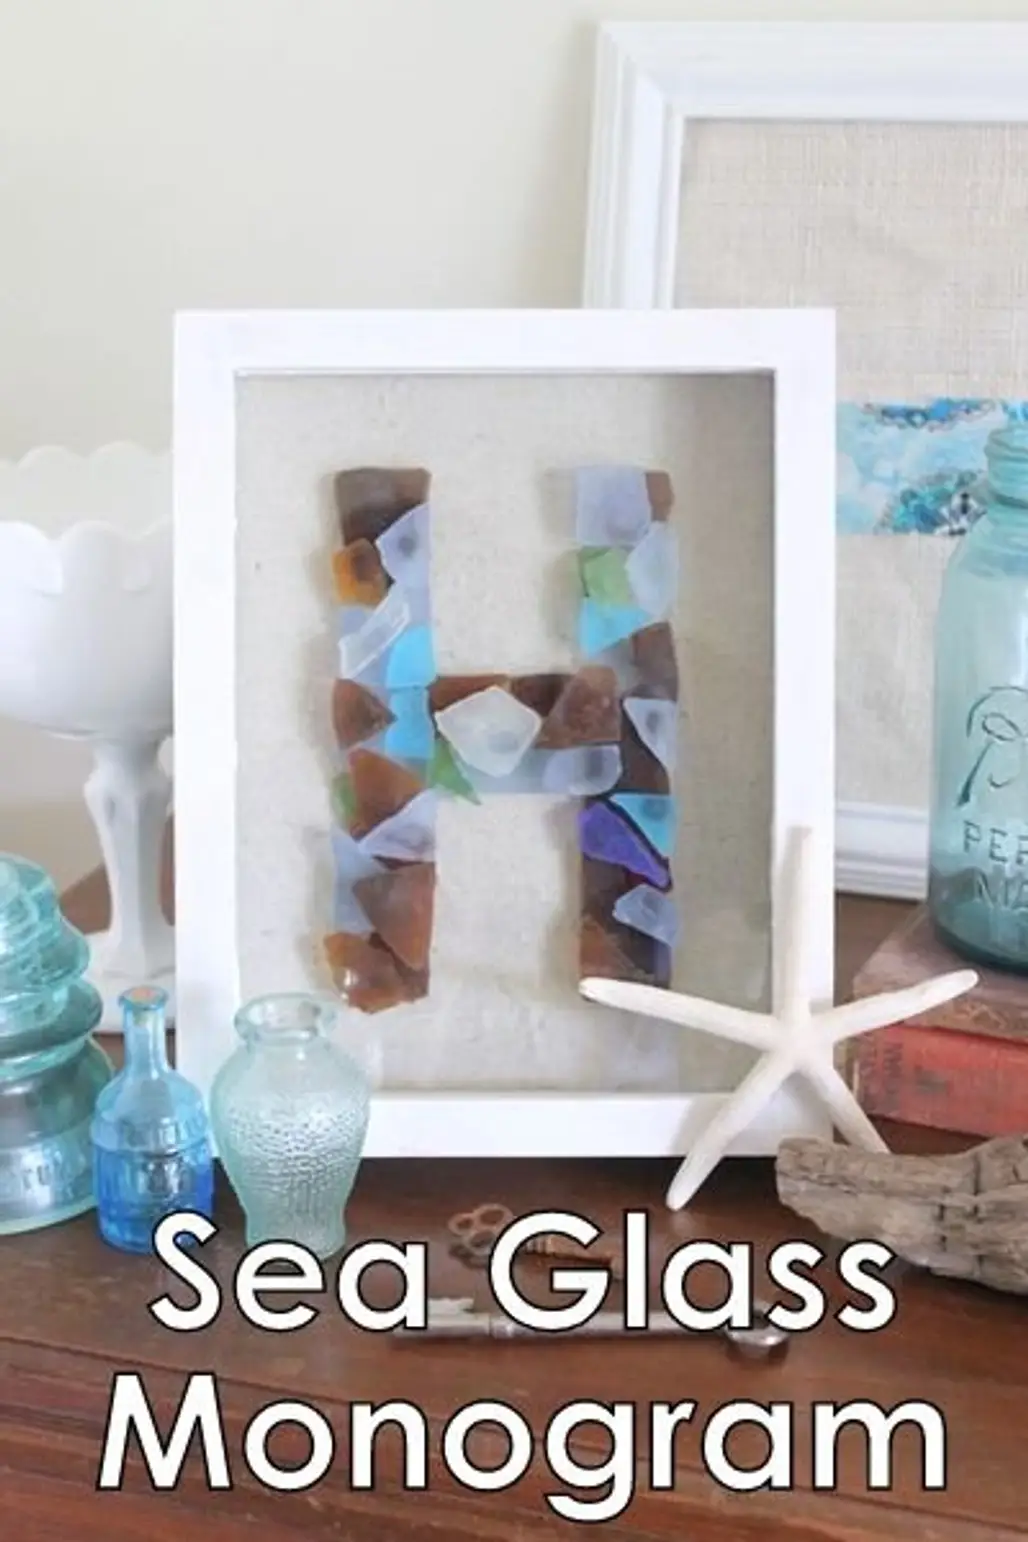 Make This Monogram Art with Your Favorite Sea Glass Pieces